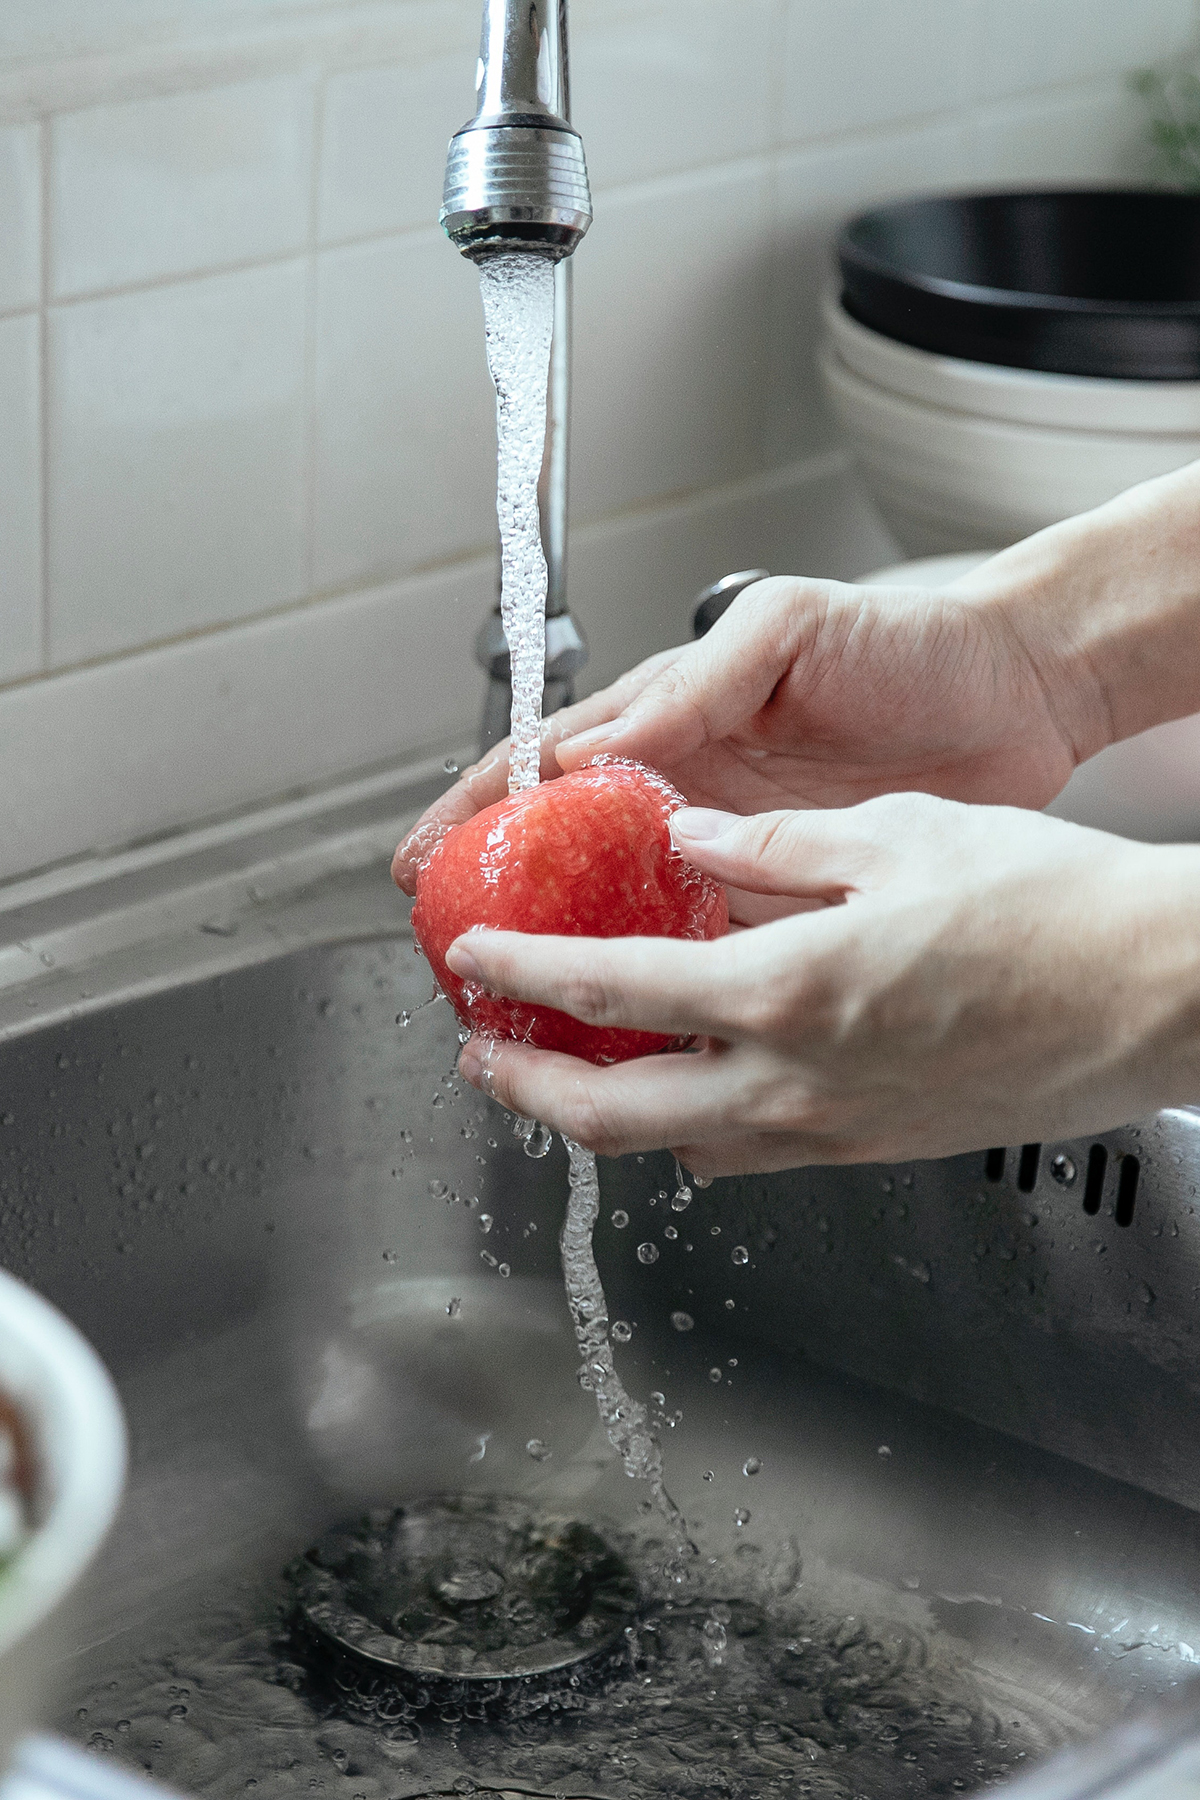 hands washing an apple in a silver kitchen sink.